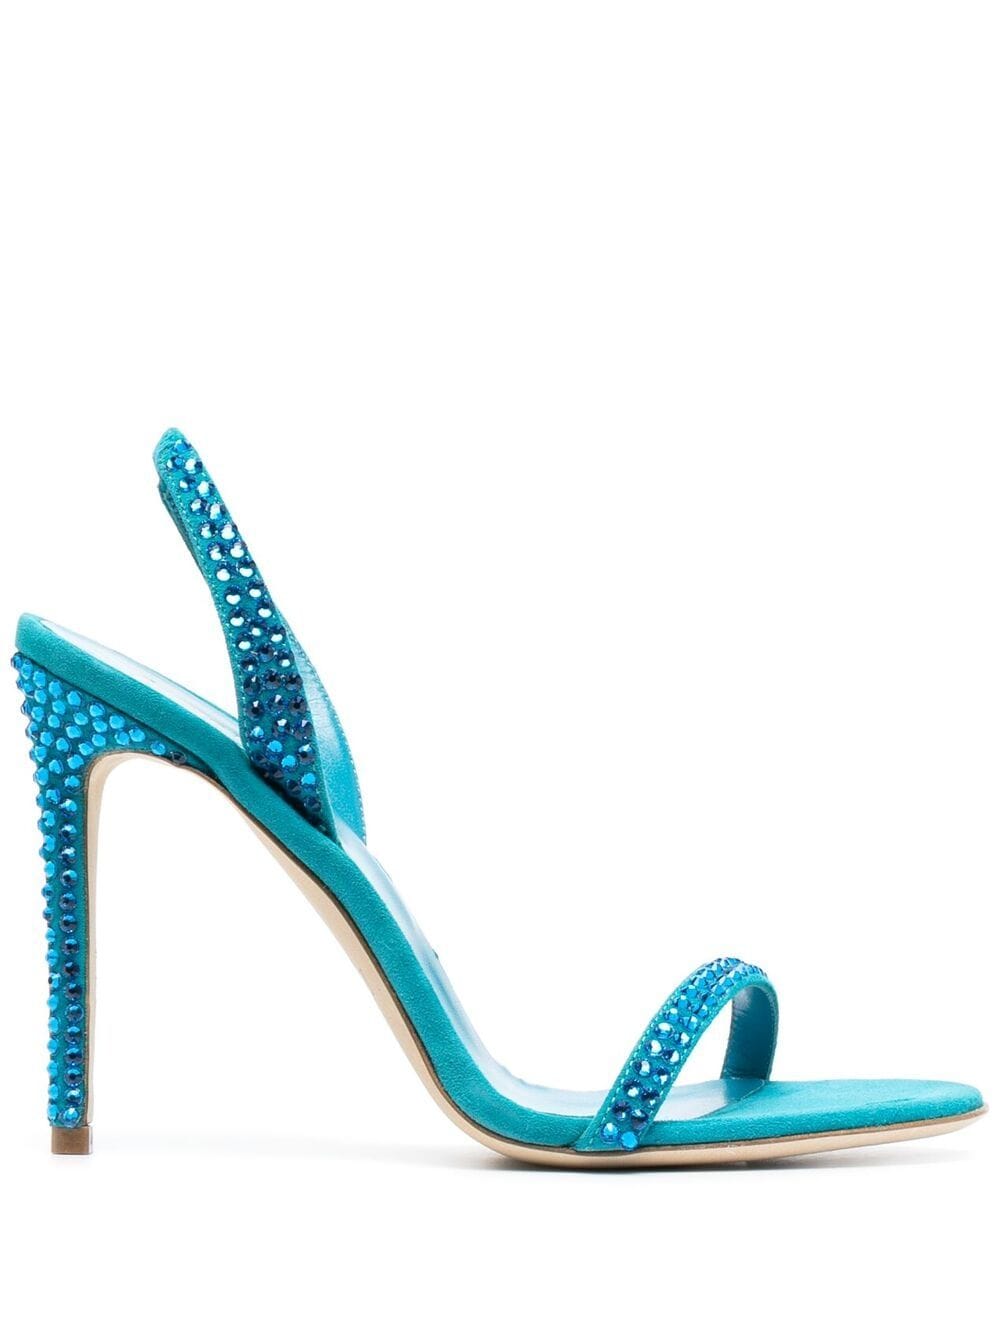 Paris Texas Sach 115mm Crystal-embellished Sandals In Blue